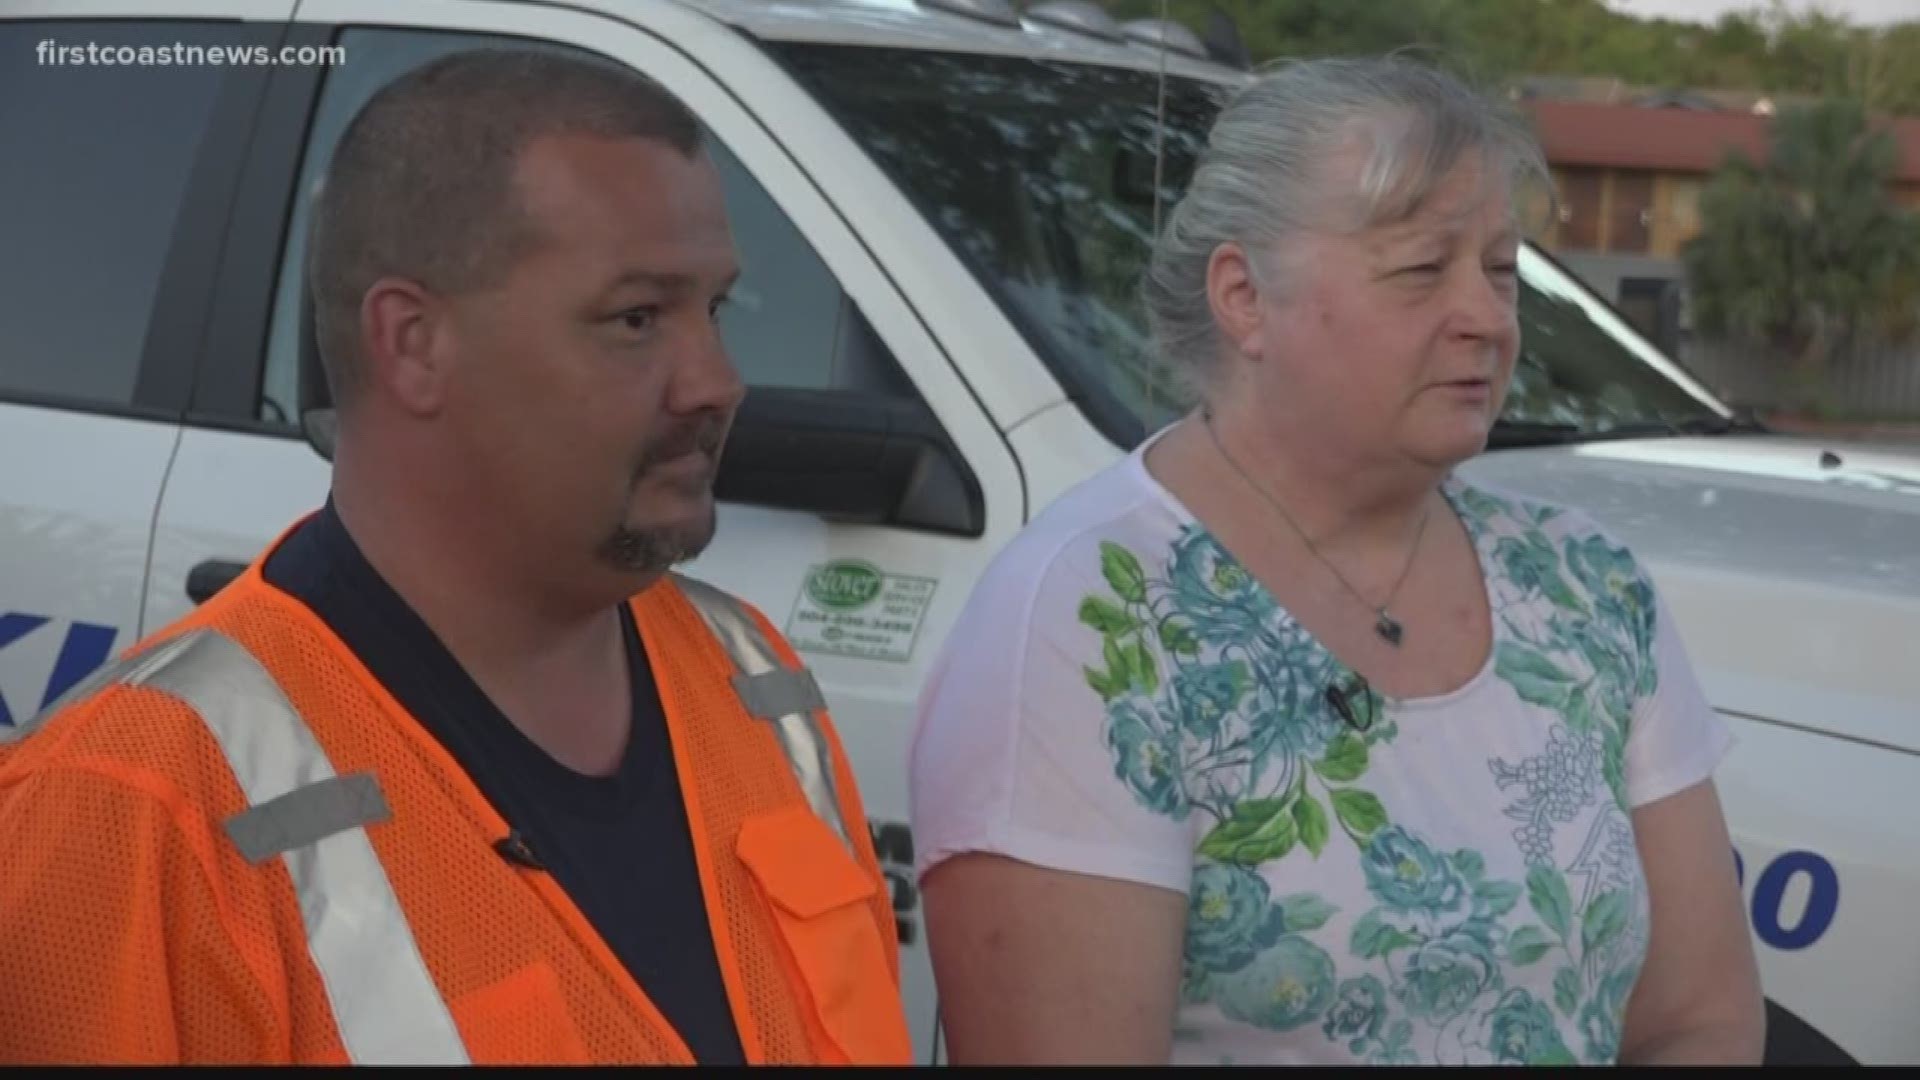 An exclusive interview with the man and woman who helped save an autistic boy from being hit by several cars in Orange Park.